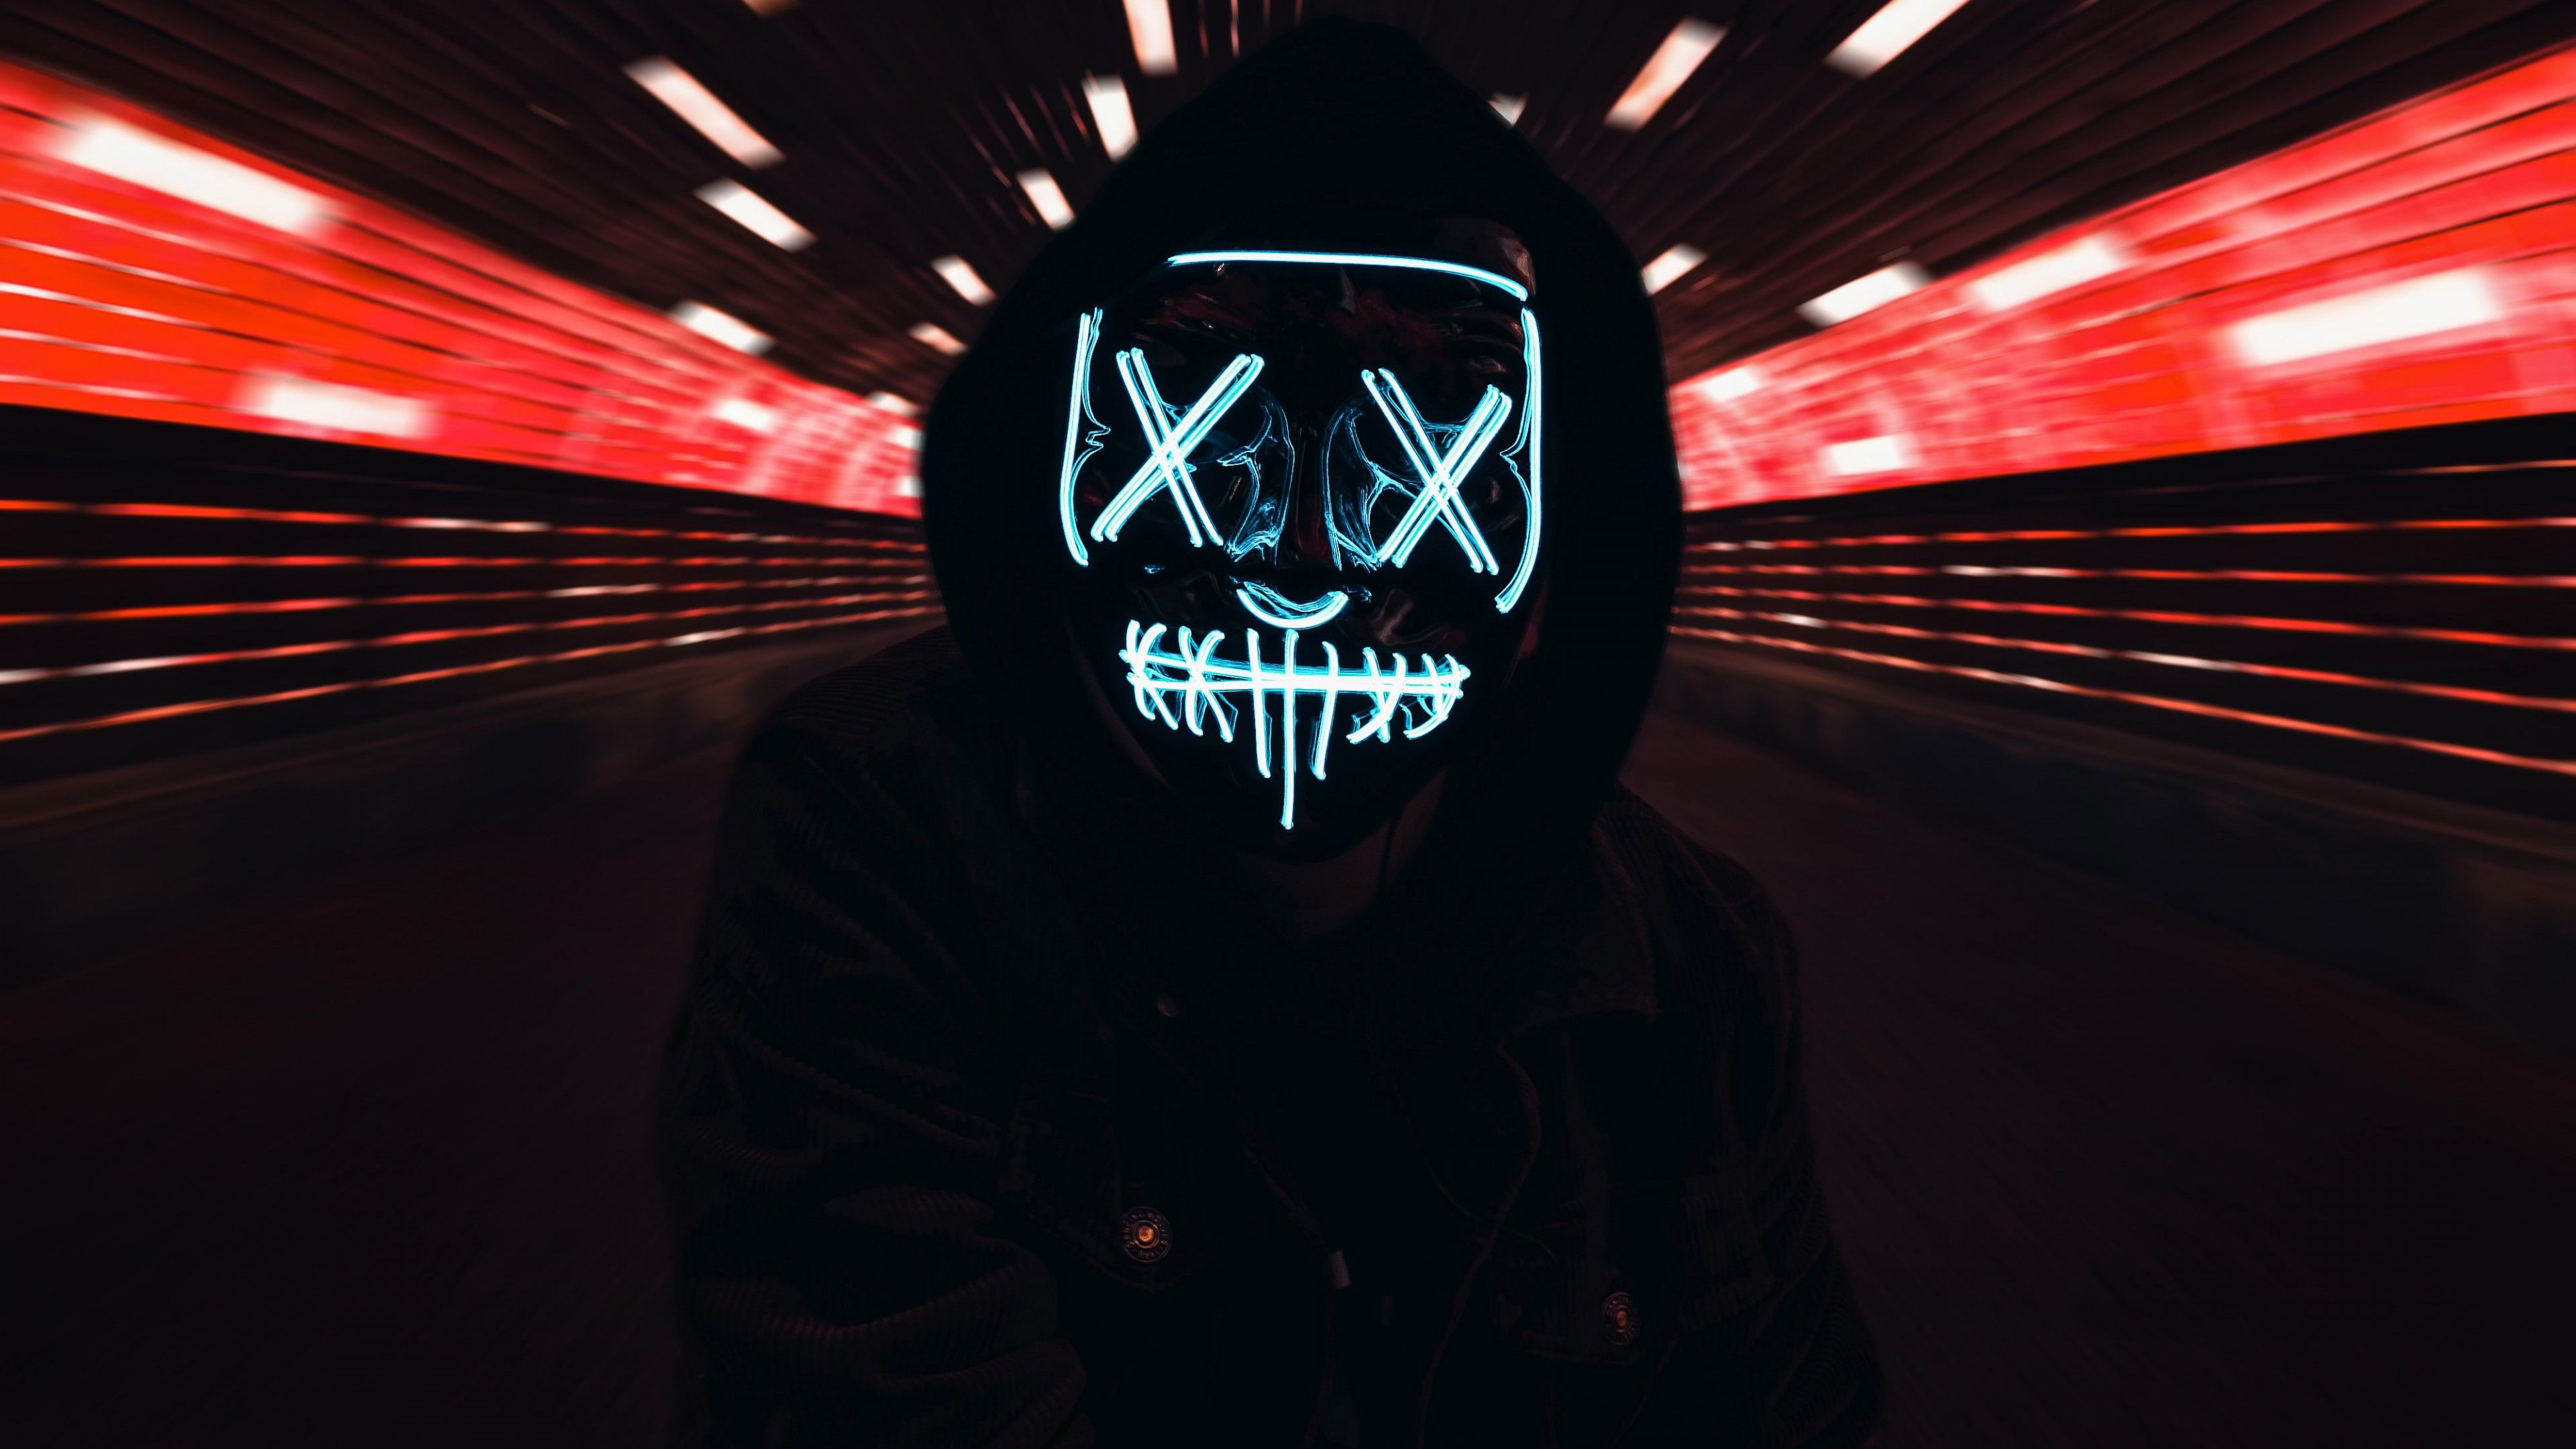 The guy in the black jacket in the neon mask of anonymous on his face wallpaper and image, picture, photo